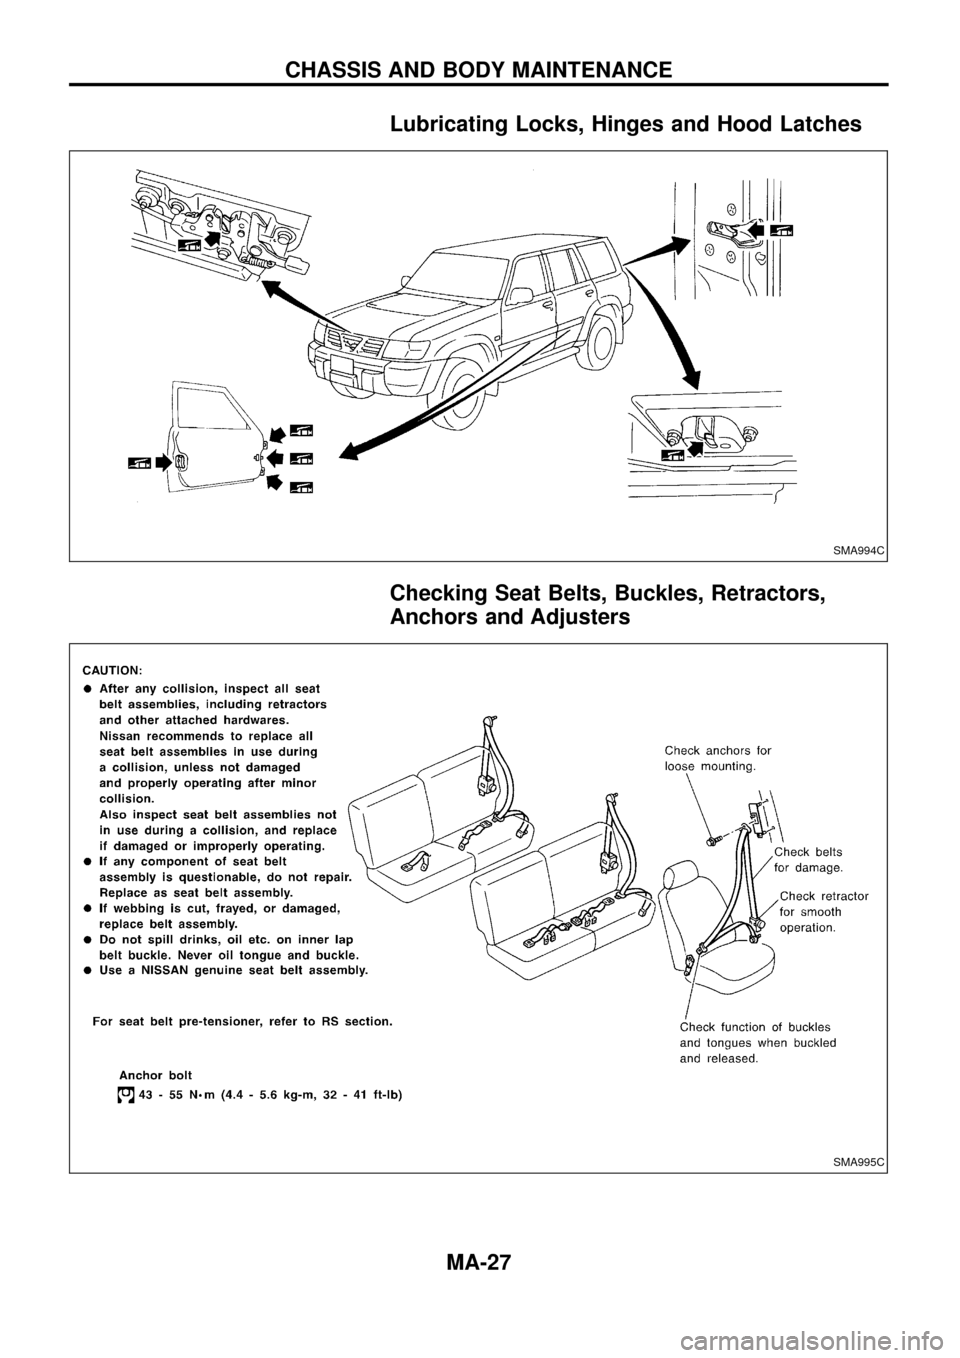 NISSAN PATROL 1998 Y61 / 5.G Maintenance Owners Manual Lubricating Locks, Hinges and Hood Latches
Checking Seat Belts, Buckles, Retractors,
Anchors and Adjusters
SMA994C
SMA995C
CHASSIS AND BODY MAINTENANCE
MA-27 